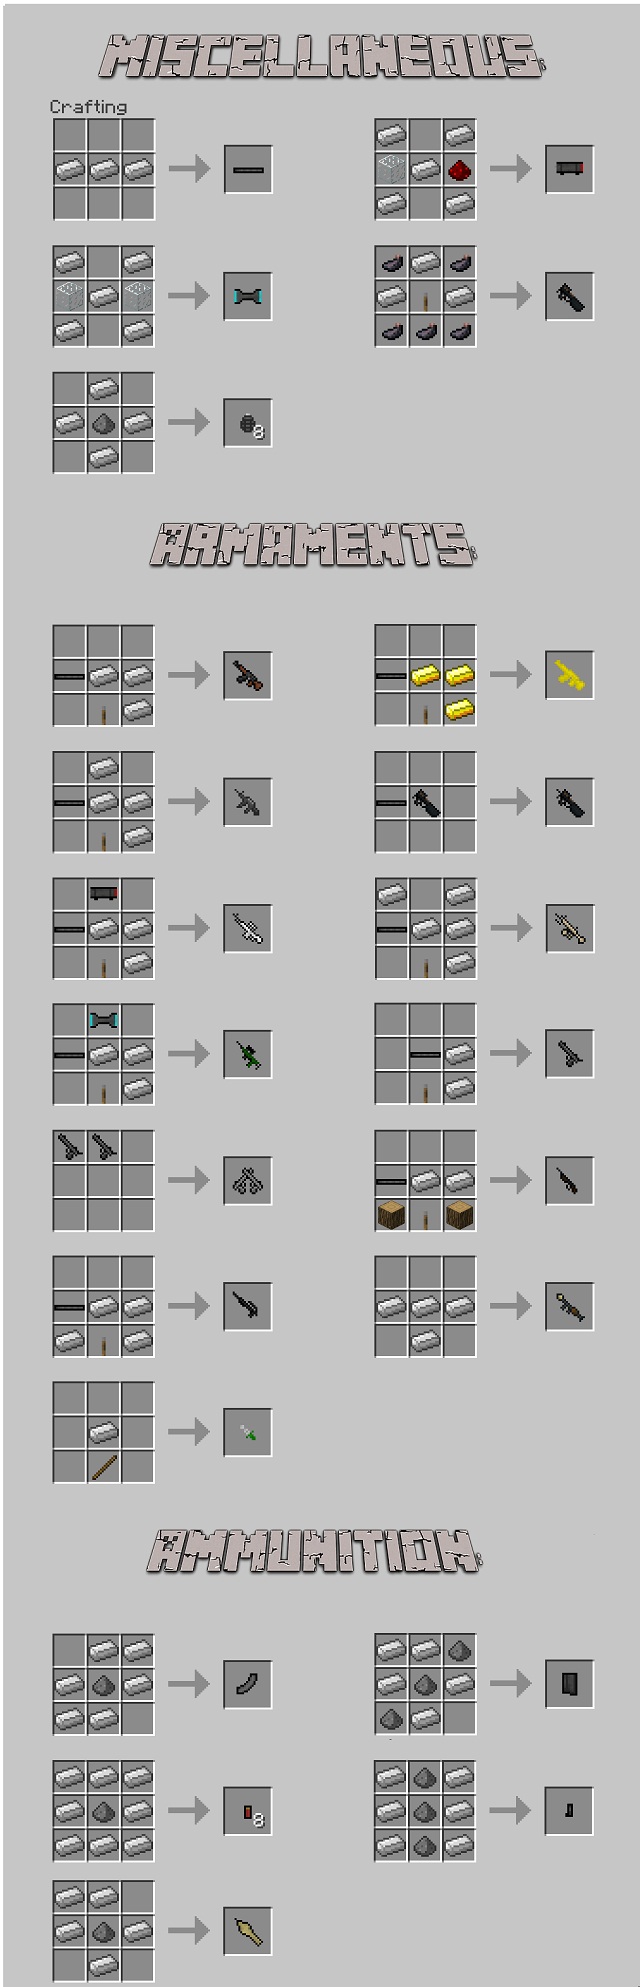 Download mod for weapons for Minecraft 1.7.10 / 1.7.2 / 1.6.2 - 3D Gun